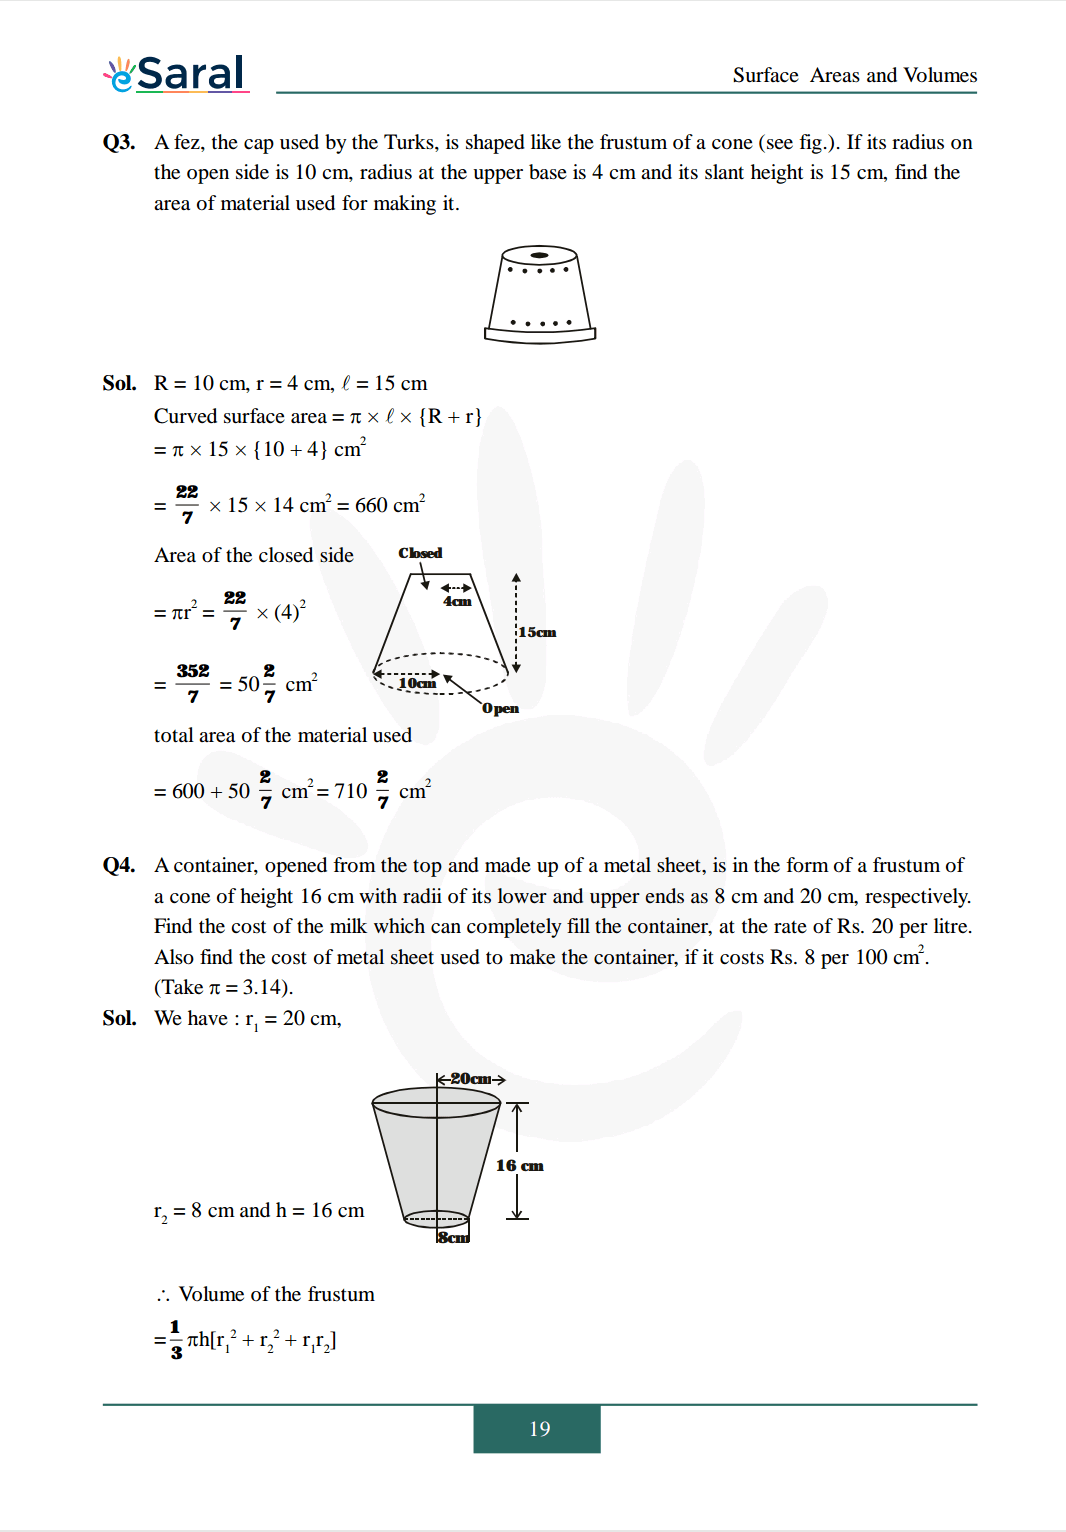 Class 10 Maths Chapter 13 exercise 13.4 solutions Image 2